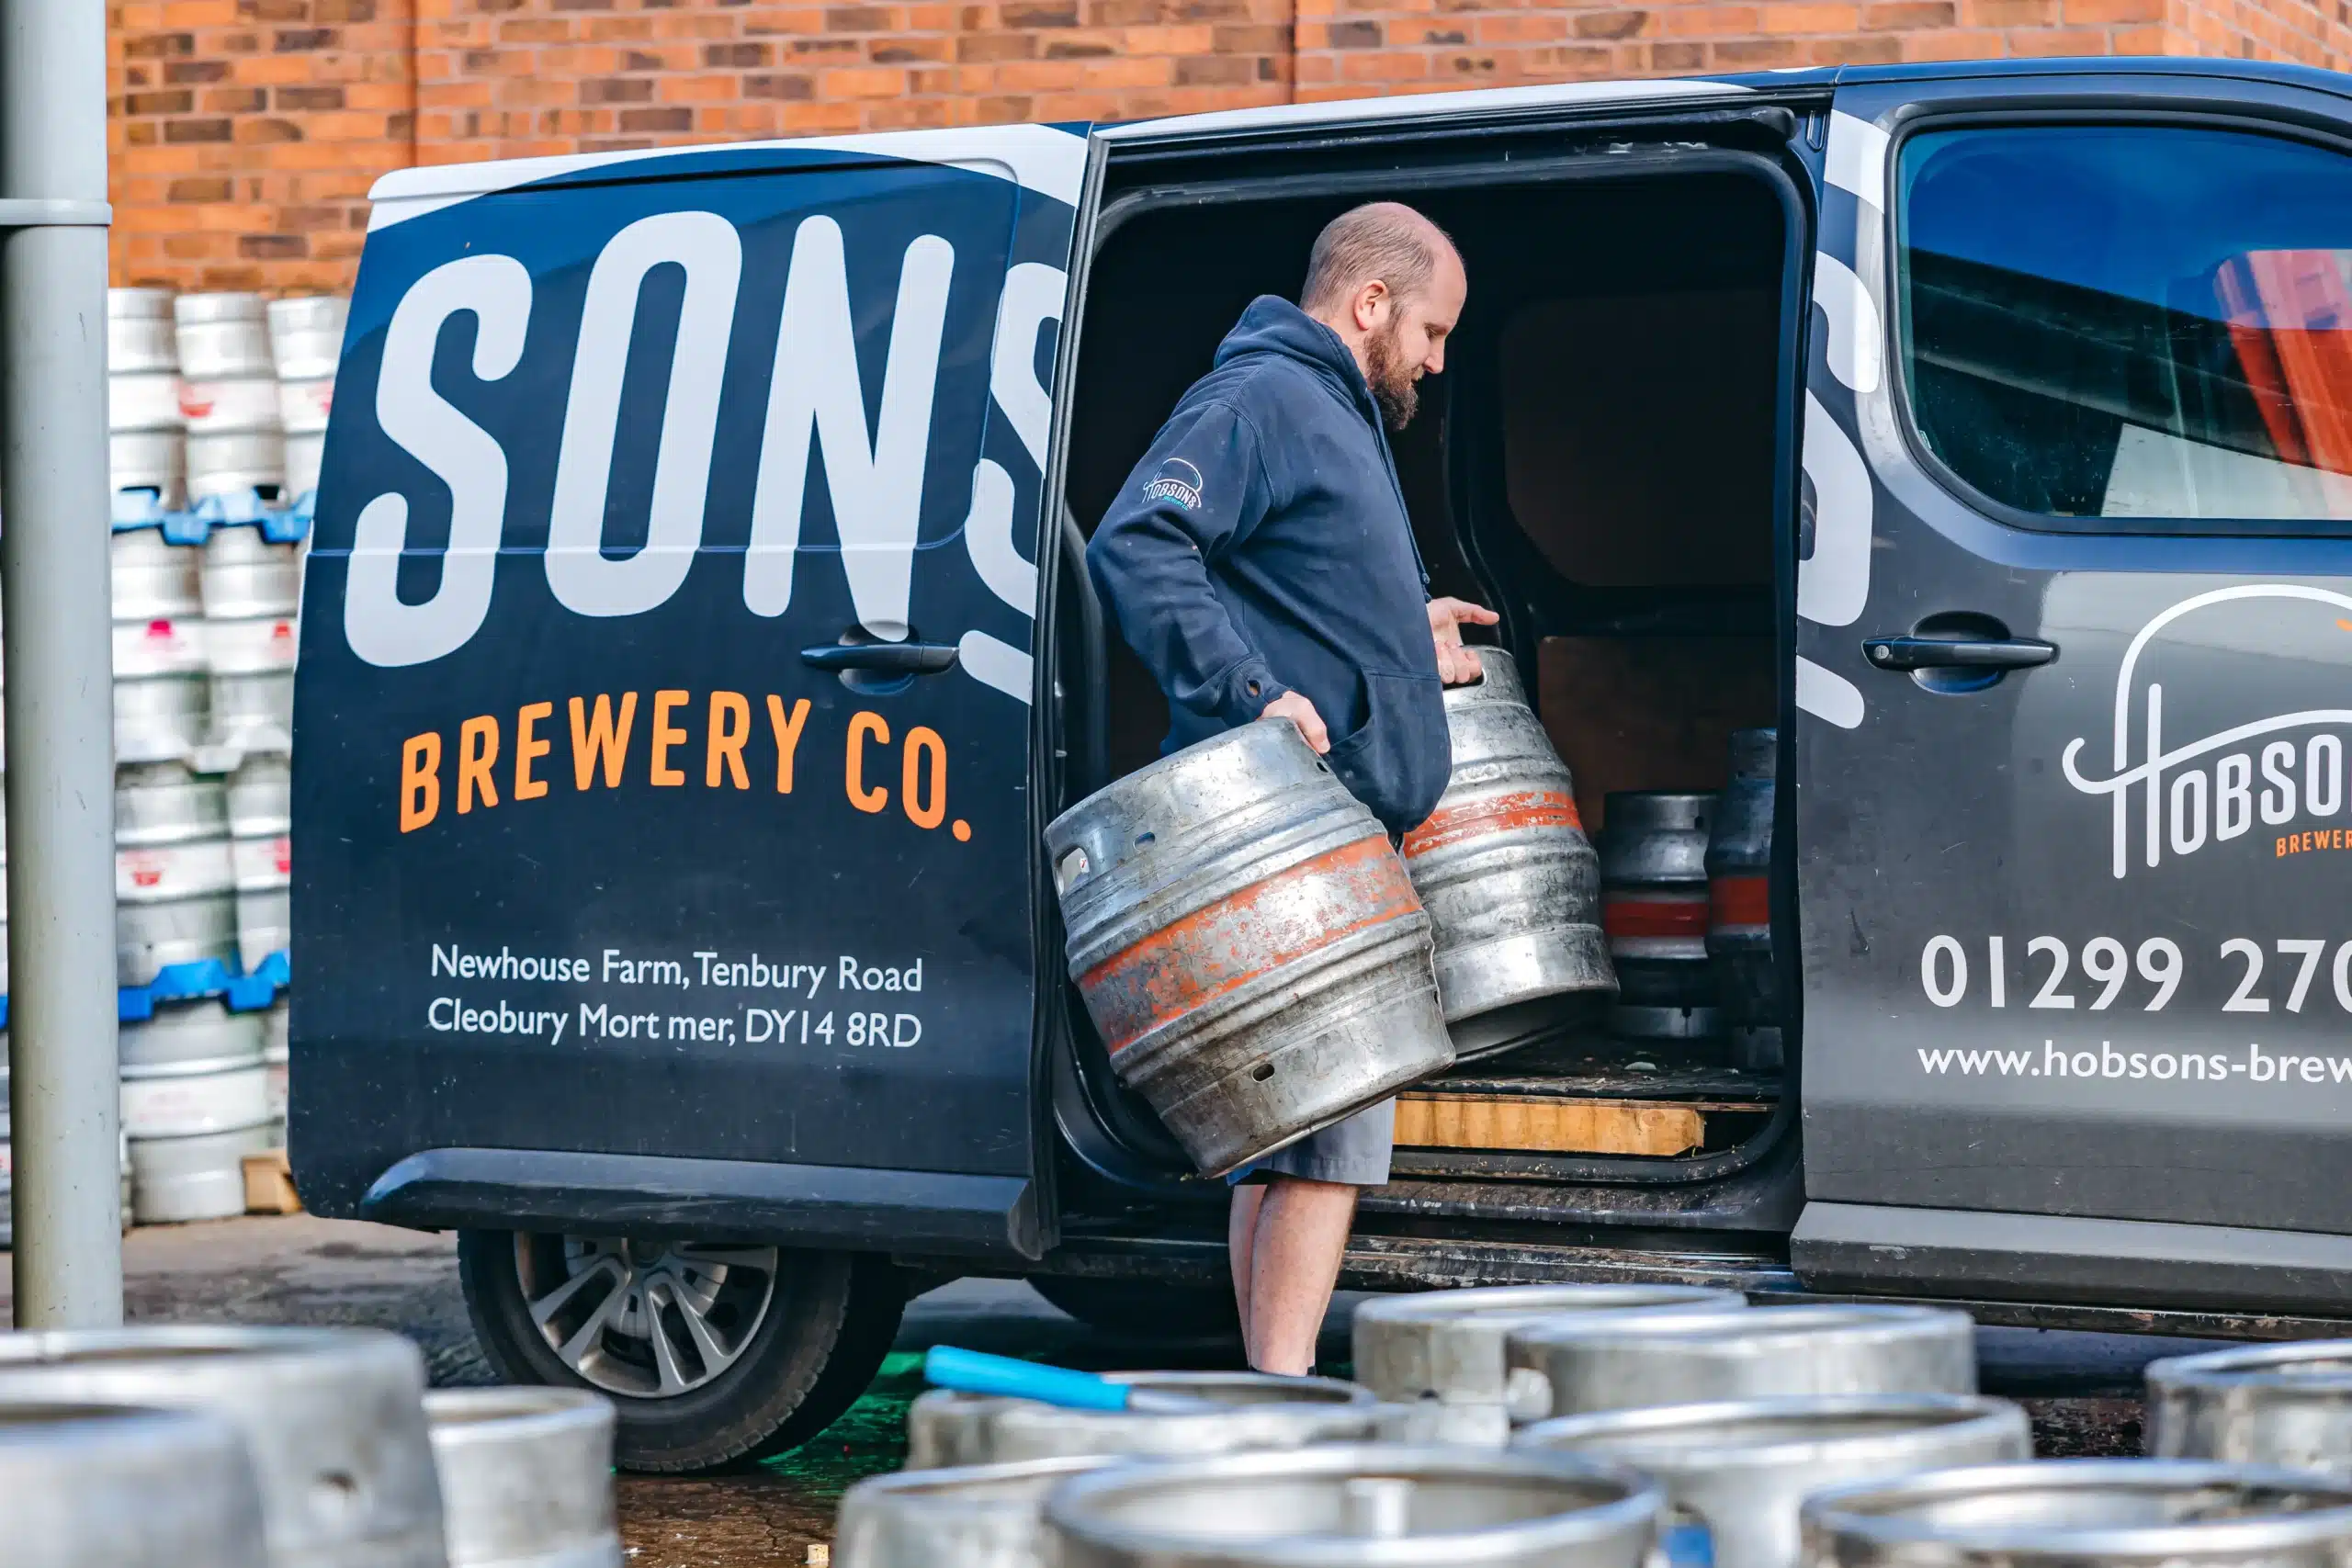 A man loads two kegs of beer into a blue van with Hobsons Brewery branding on the side